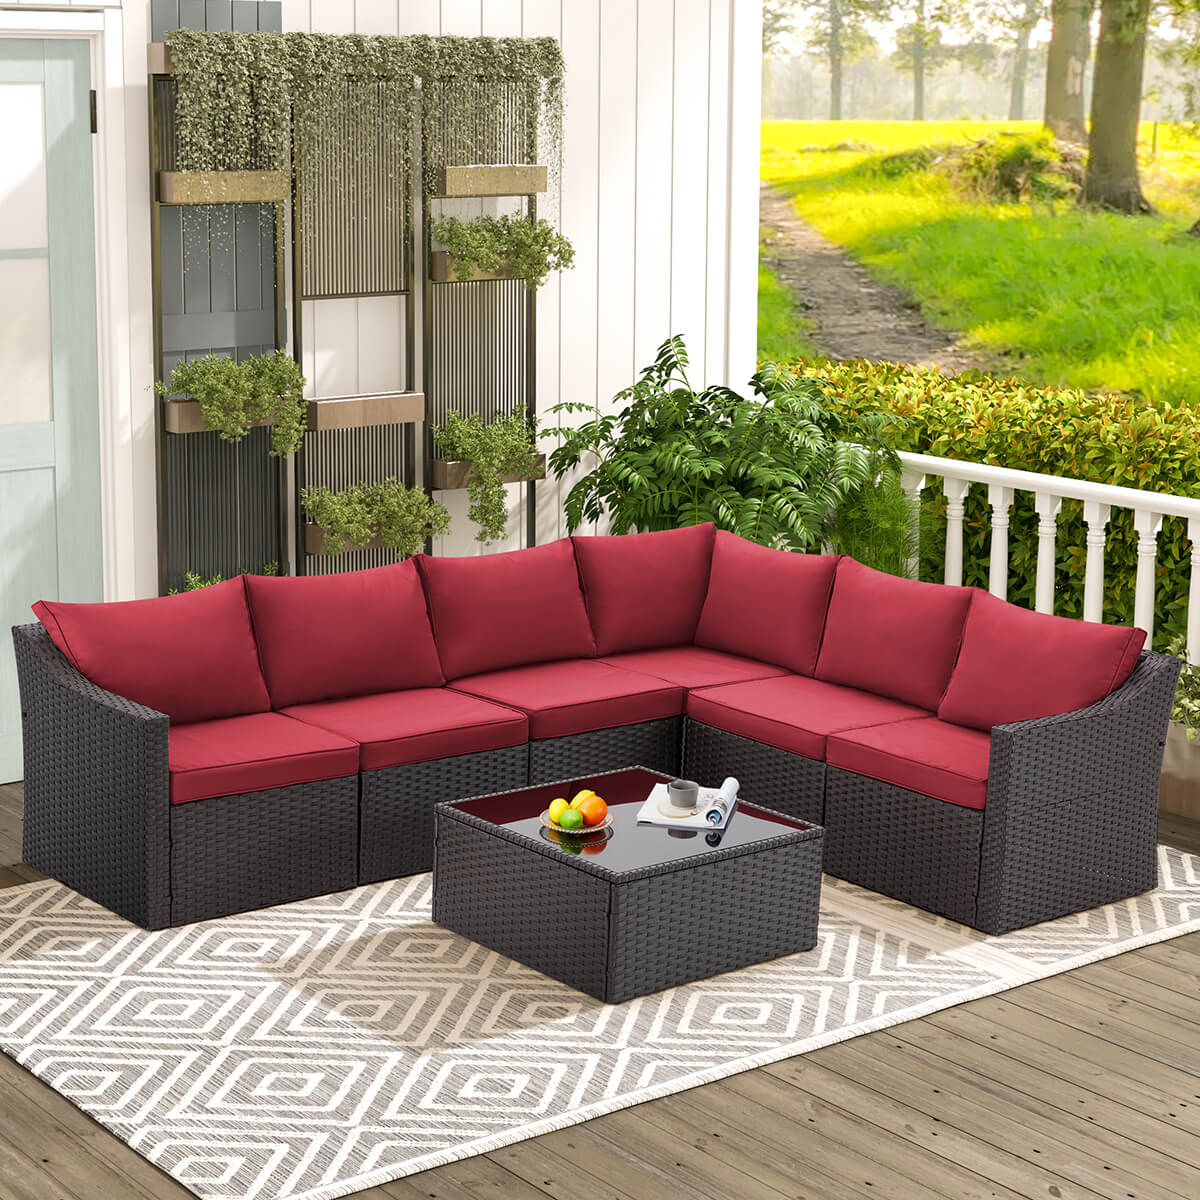 7 pcs outdoor rattan sectional sofa all weather patio funiture set